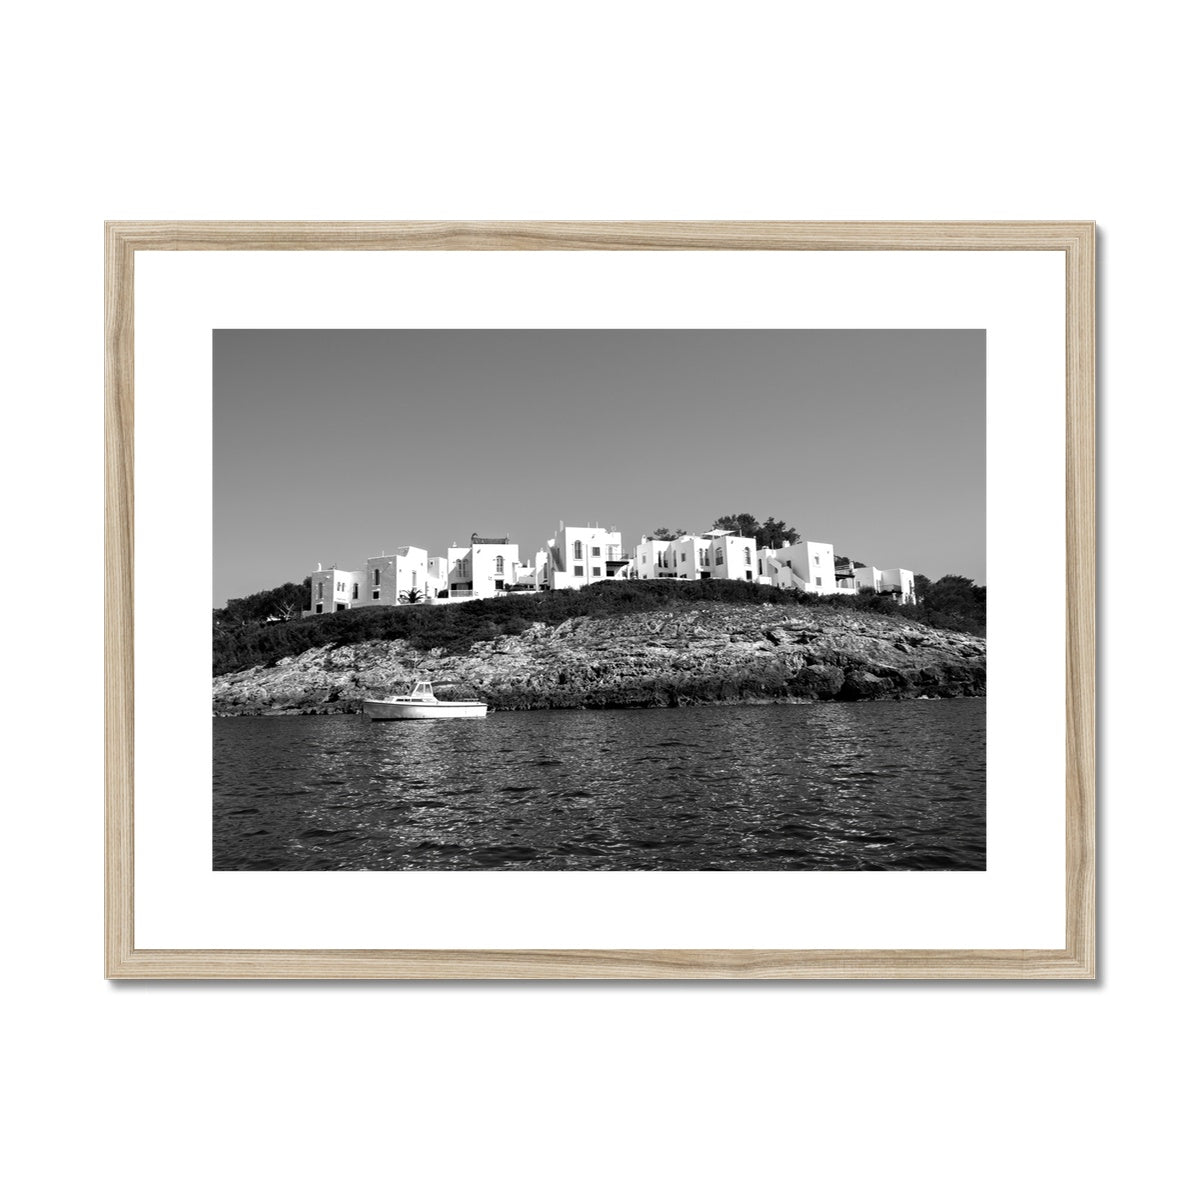 Houses of Portinatx Framed & Mounted Print